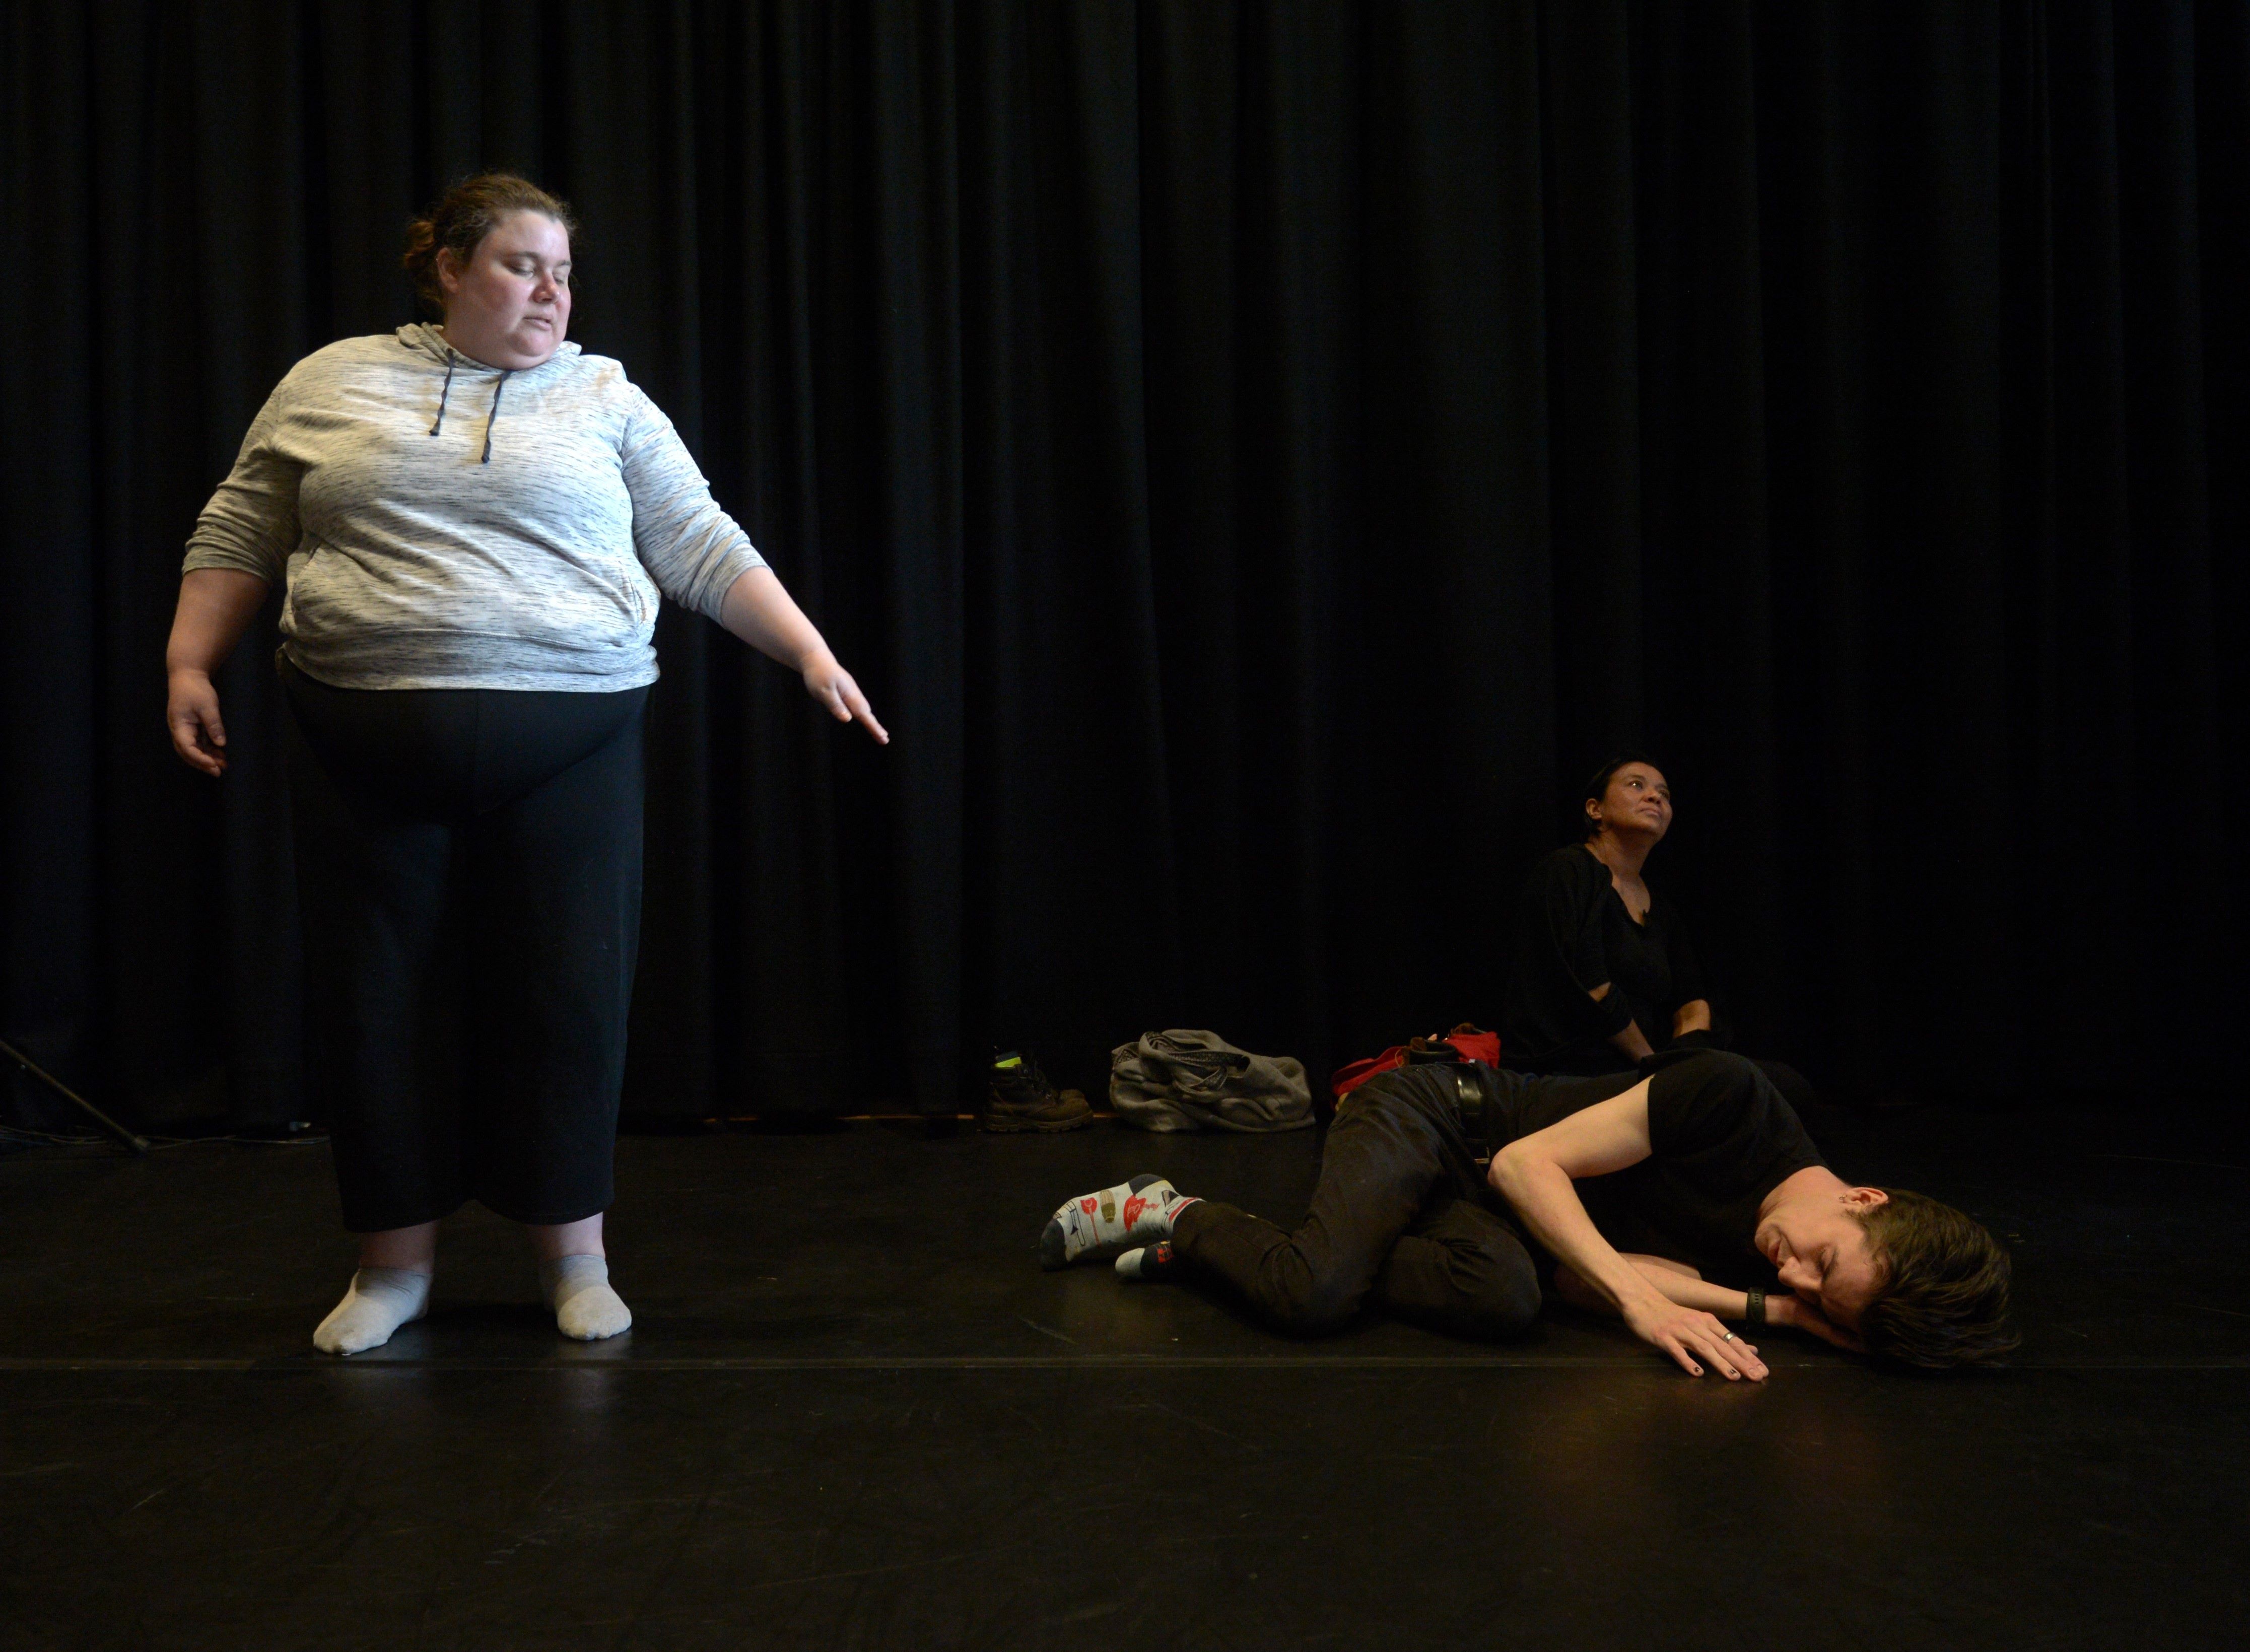 An image of Alex Craig, lit in natural light, and Jeremy Lowrencev on stage as part of Arts House and VV's CultureLab project called Disrupting sighted ableism. In background seated against black curtain is other co-performer Imogen Yang. Alex stands to the left of Jeremy who is curled on floor. Alex's left arm is extended out from their side in diagonal line to his feet. Both performers eyes are closed. Photo by Carla Gottgens.